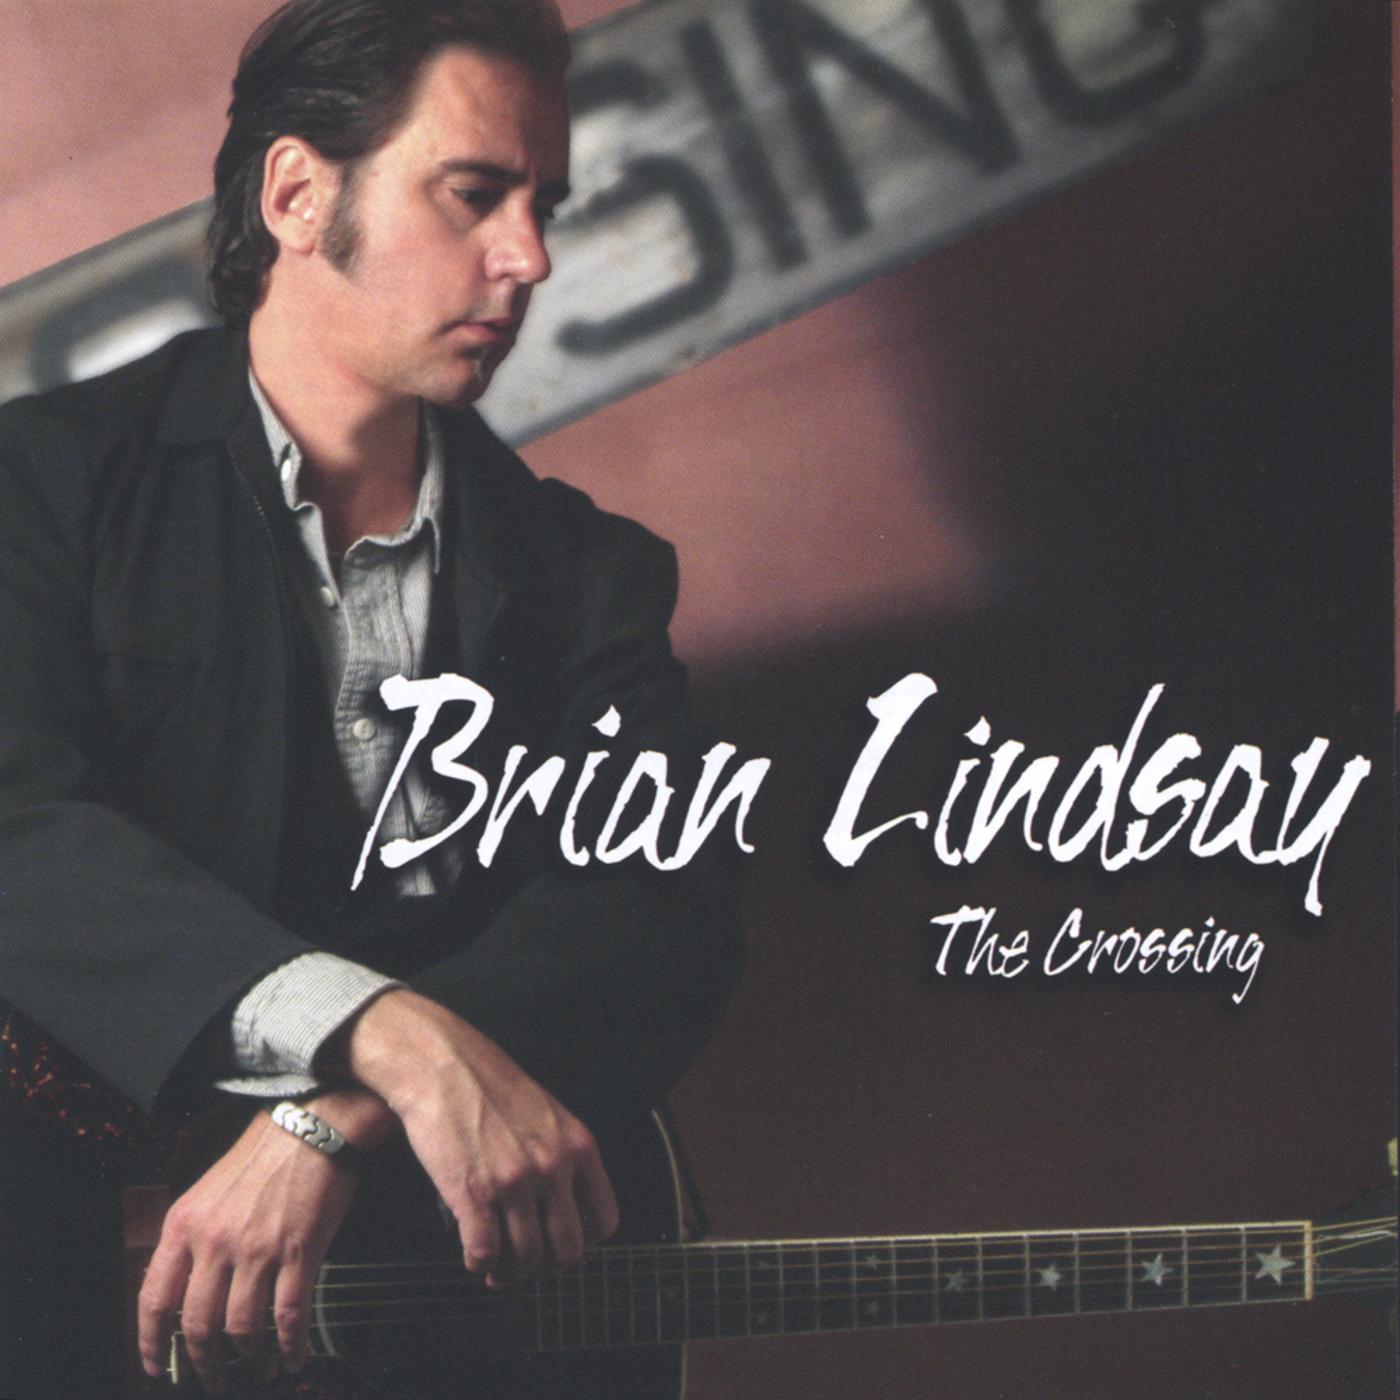 Brian Lindsay - East Side of the River